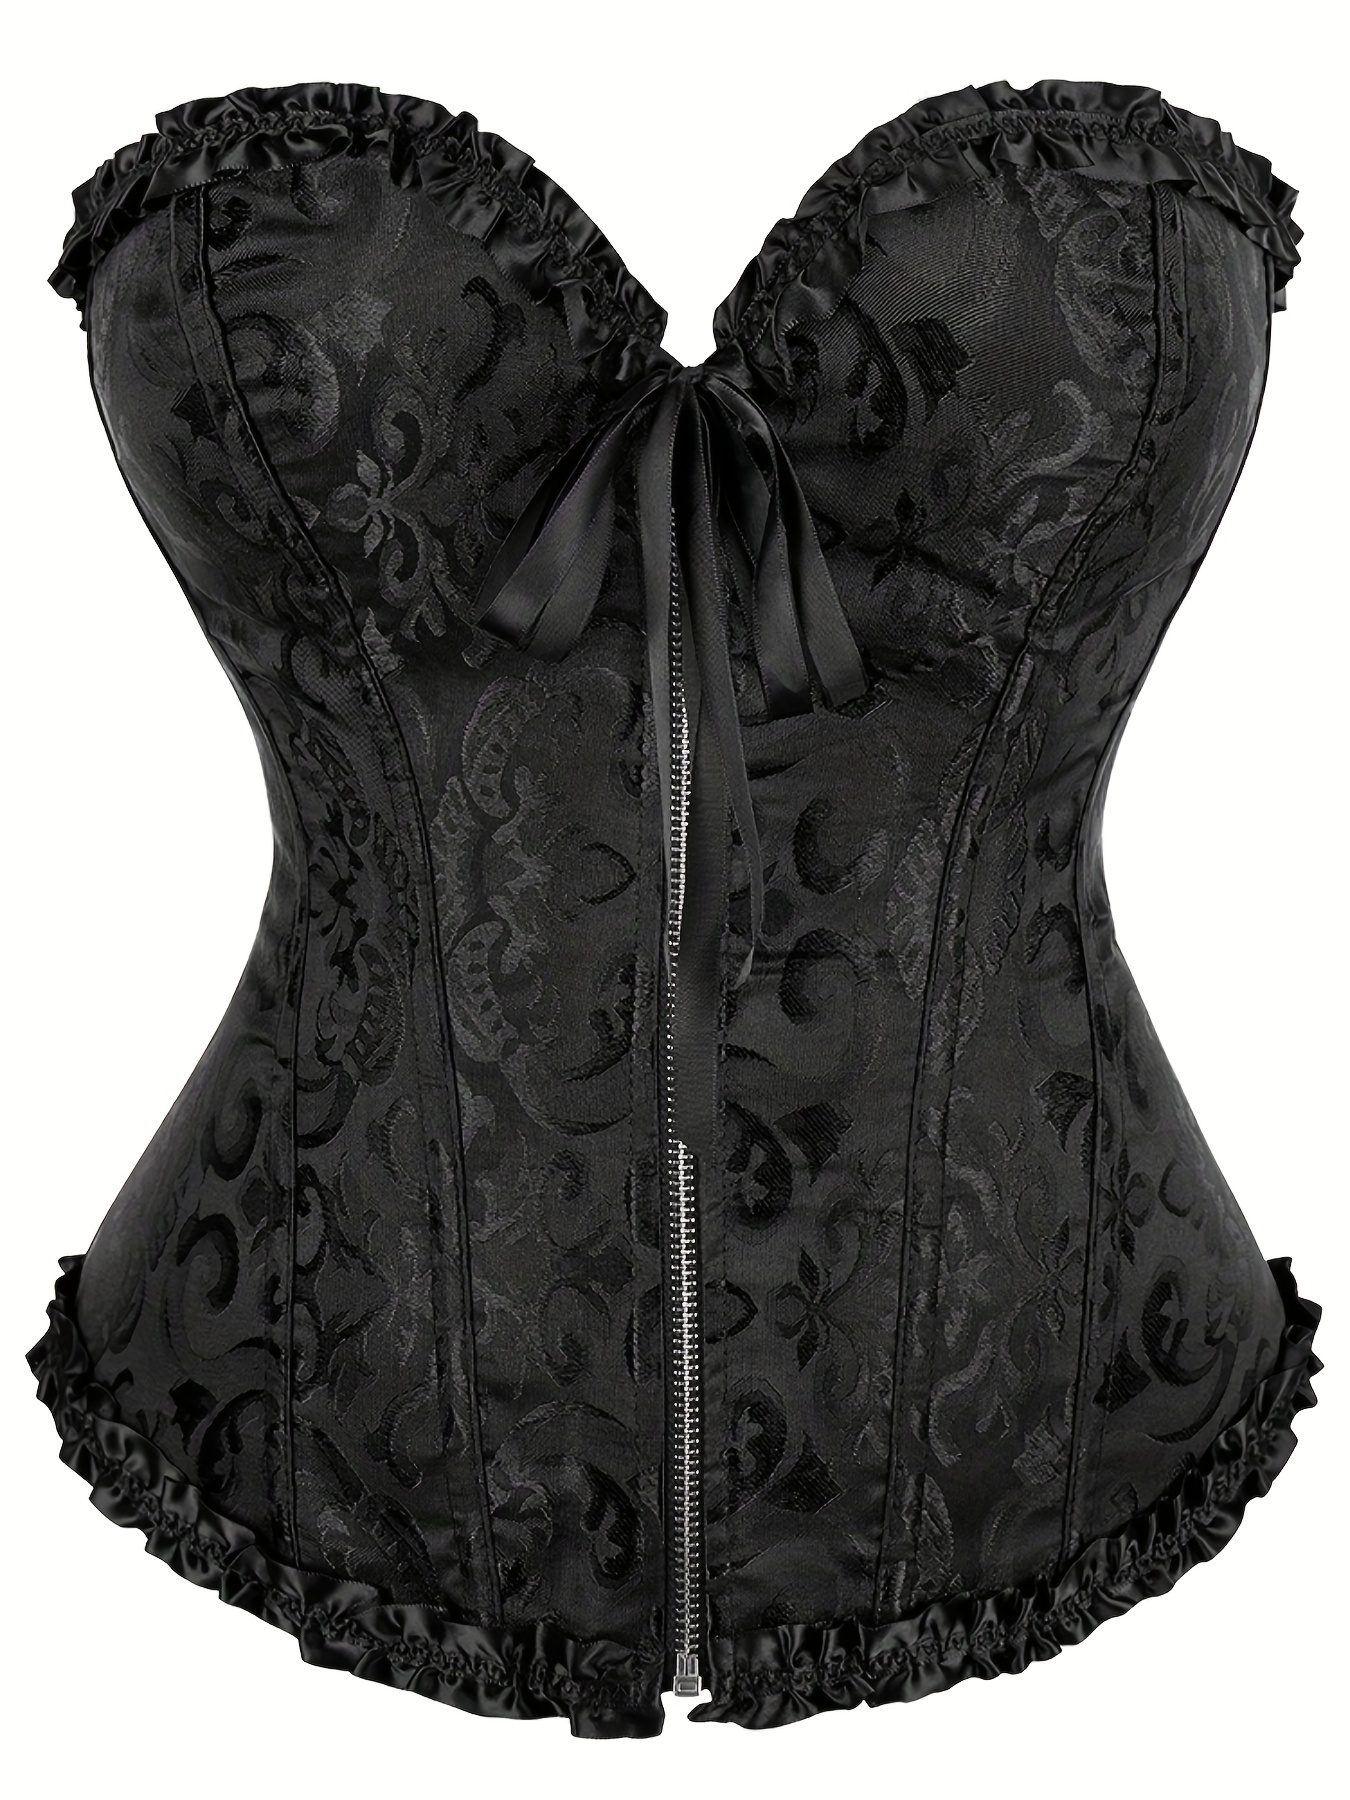 Ruffle Strapless Corset Bustier, Tummy Control Lace Up Jacquard